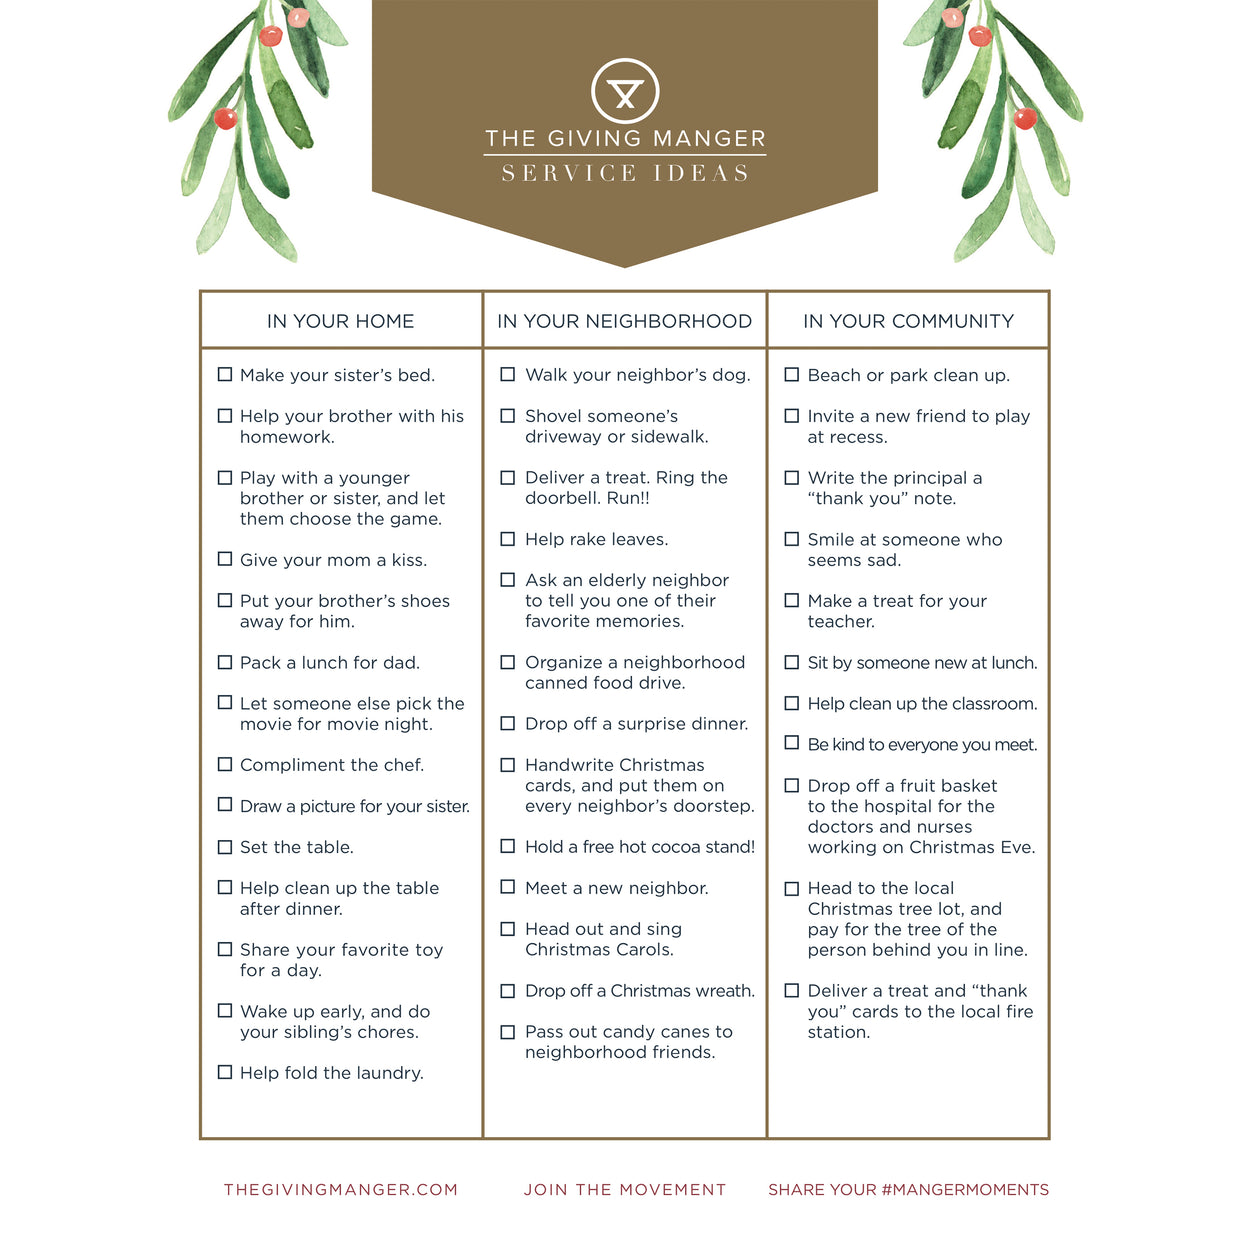 Service Ideas for Home, Neighborhood and Community - Free Printable